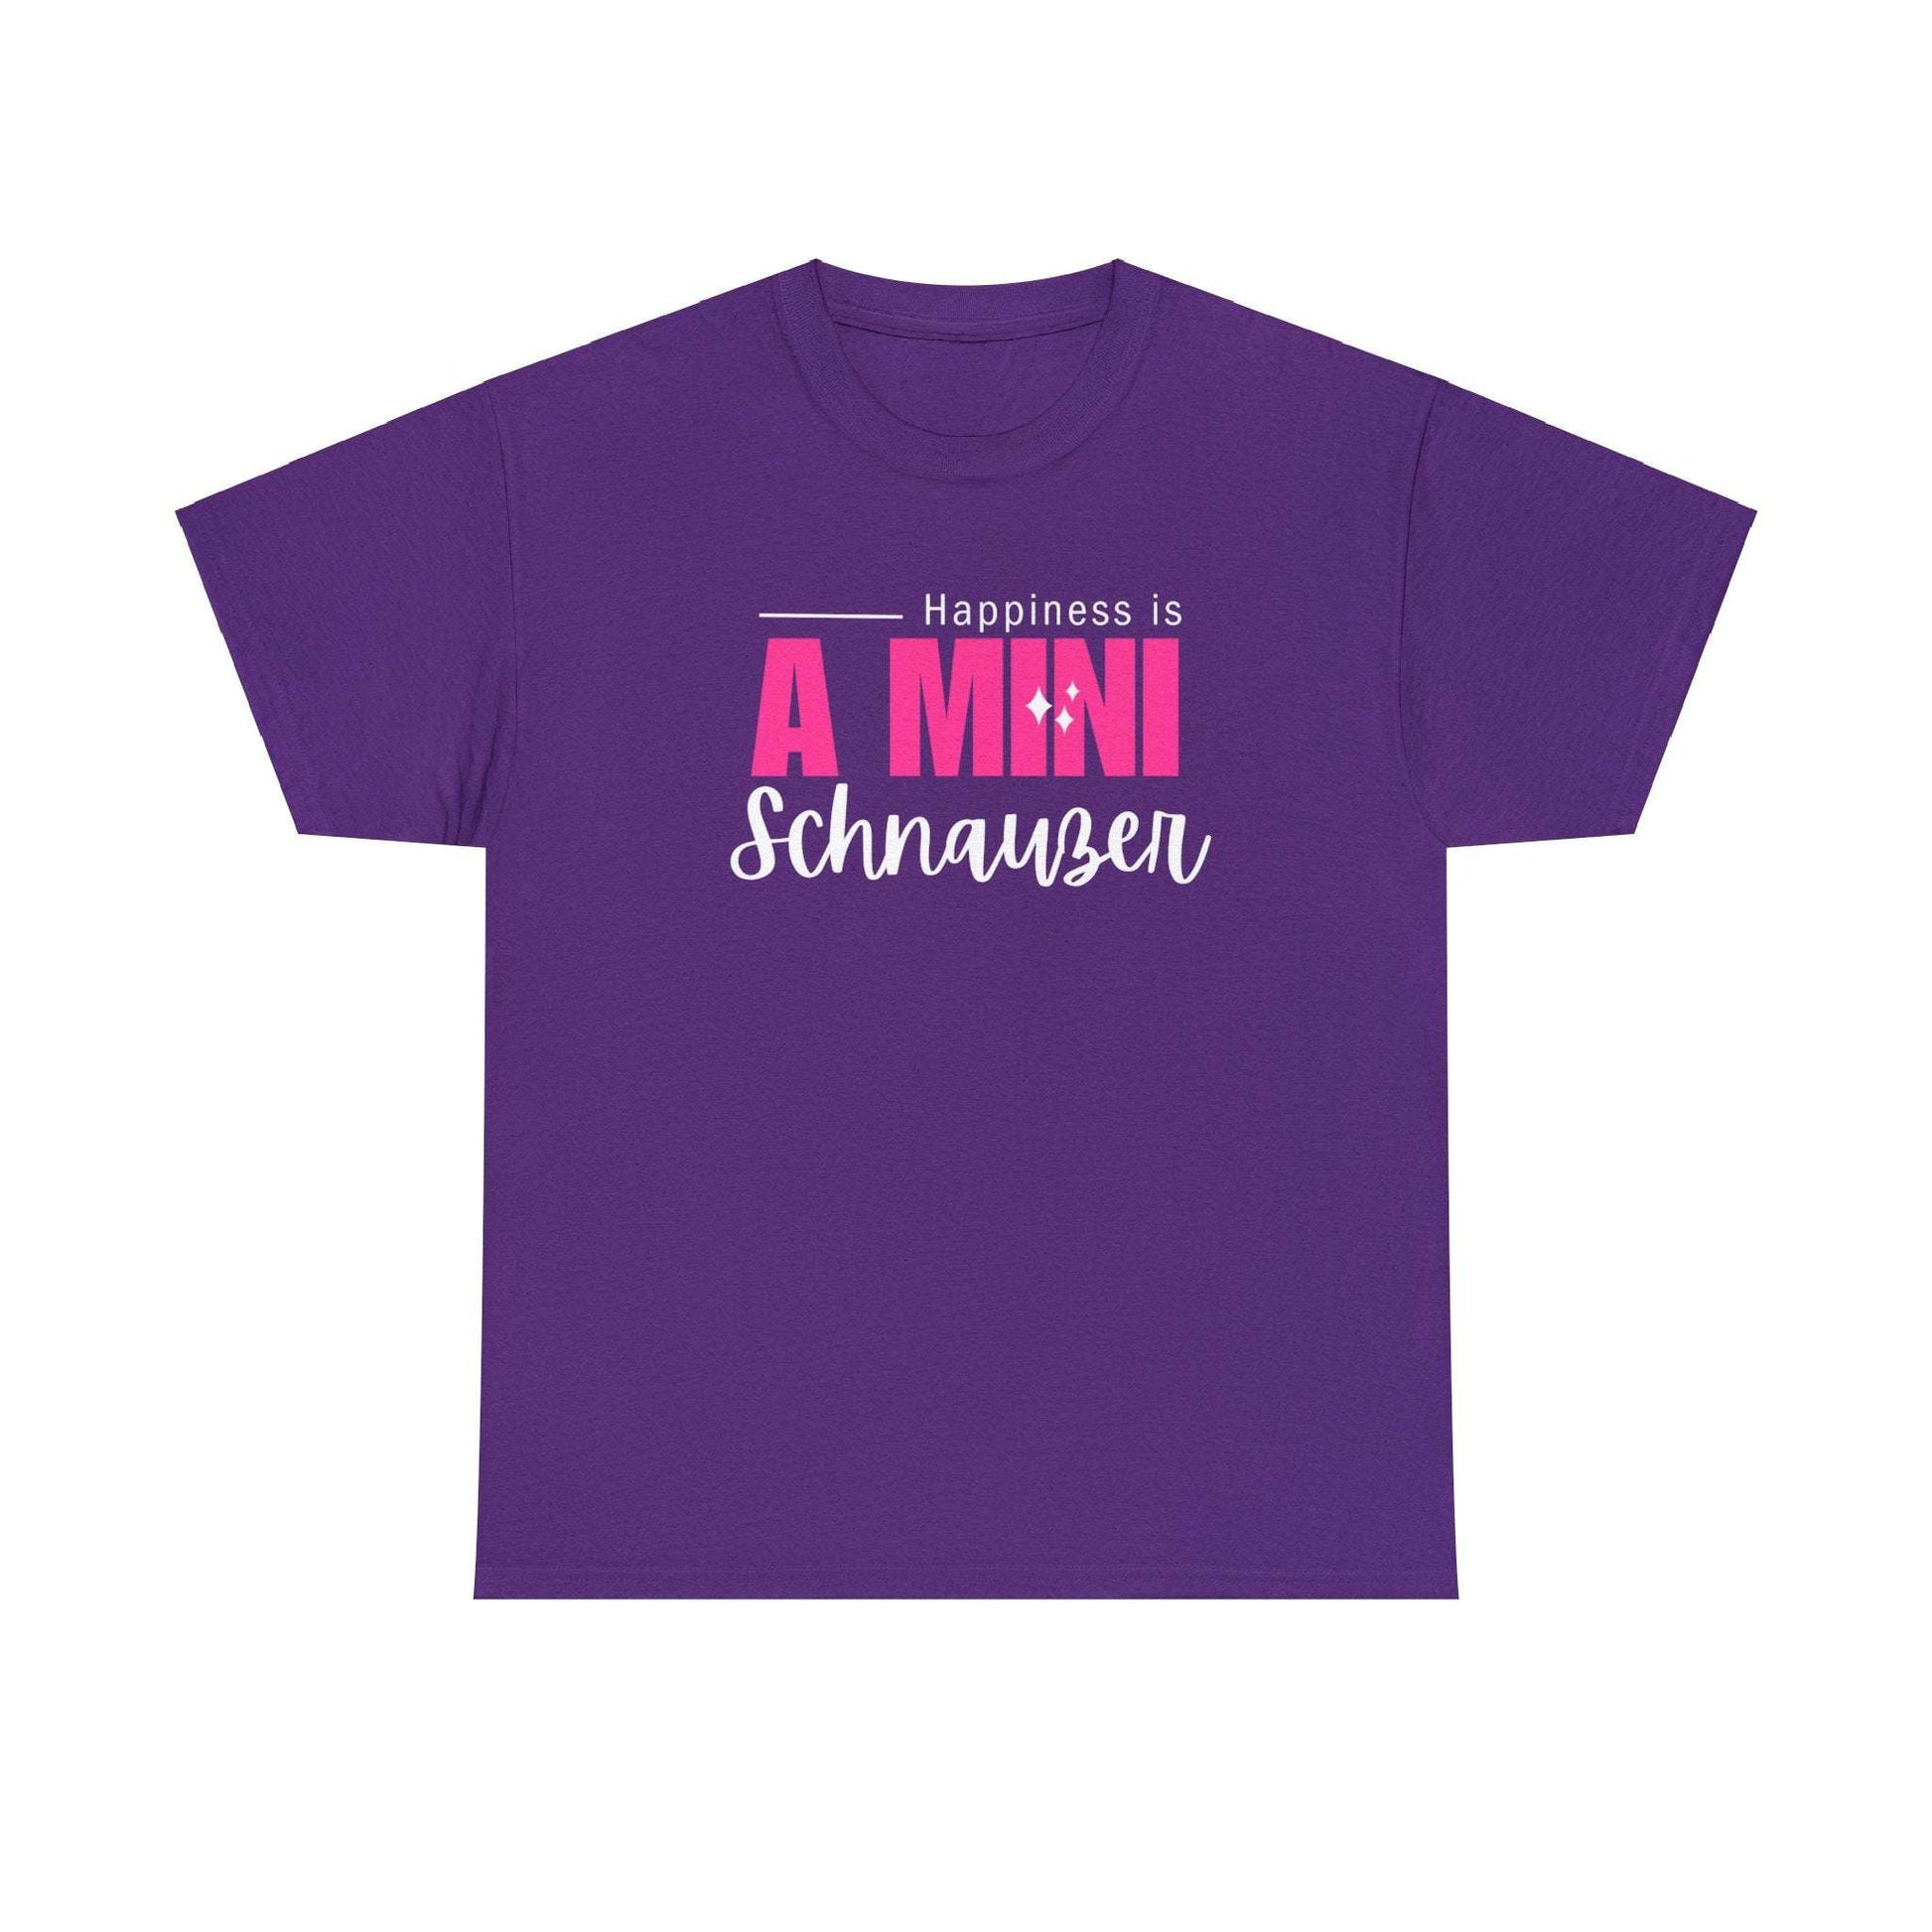 Fabulous Tee Shirts' 'Happiness Is A Mini Schnauzer' purple t-shirt displayed to emphasize its unique design and premium quality.